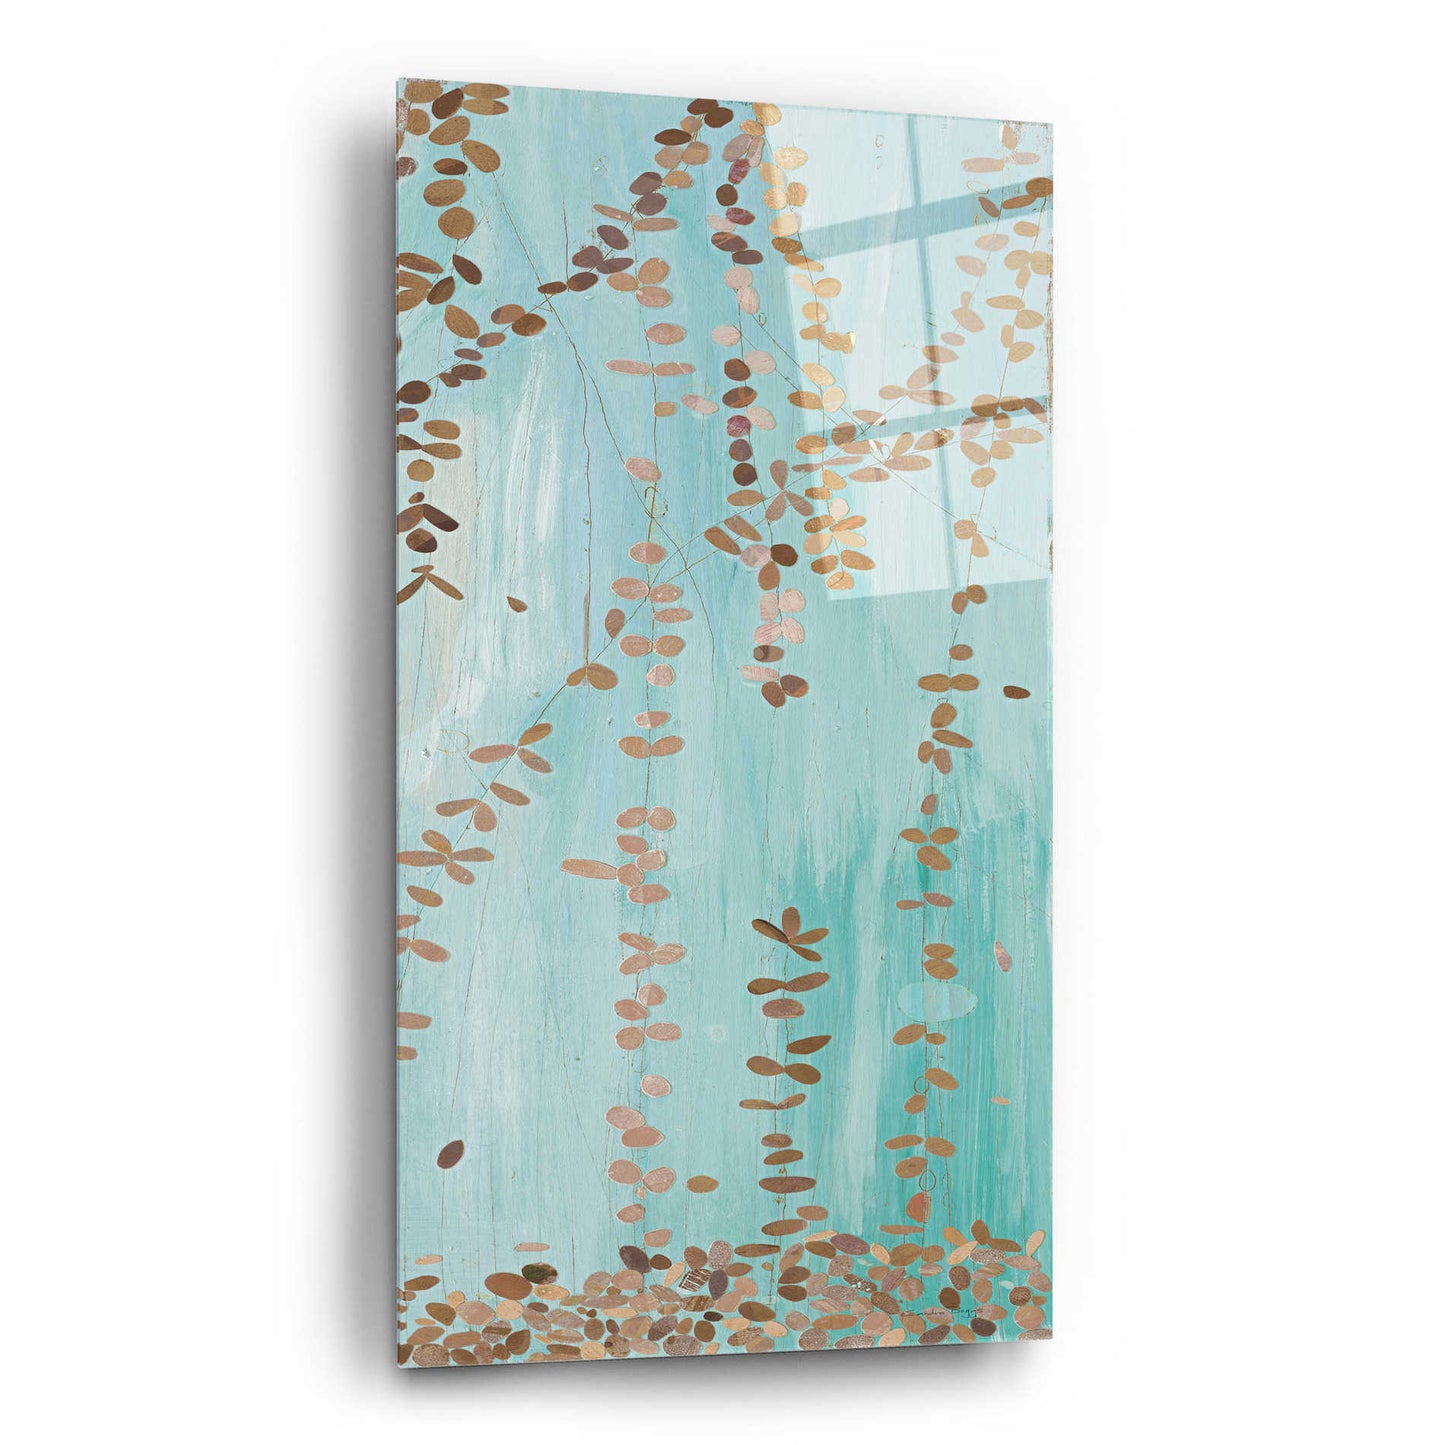 Epic Art 'Trailing Vines II Blue' by Candra Boggs,  Acrylic Glass Wall Art,12x24